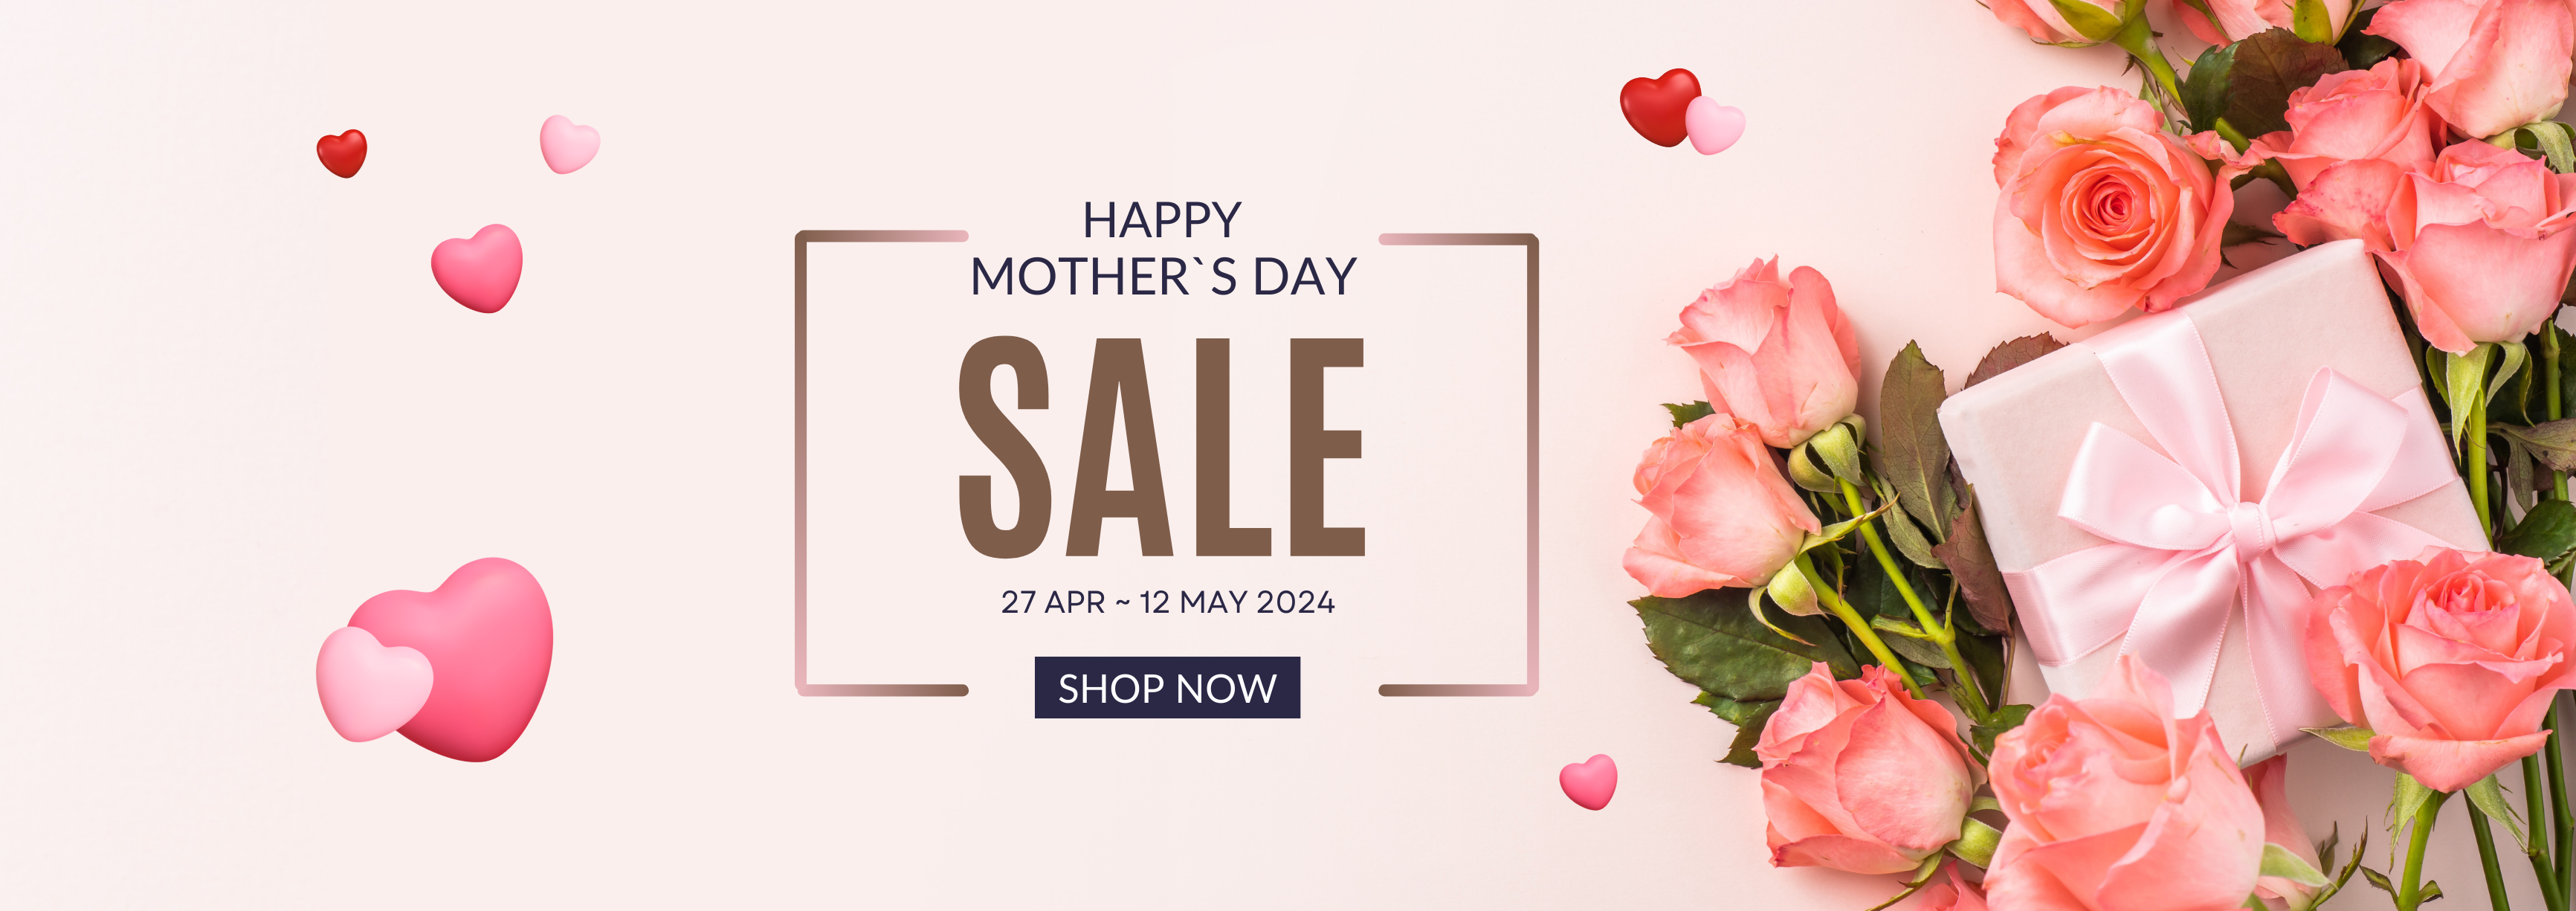 KOREAN RED GINSENG MOTHER'S DAY SALE BANNER